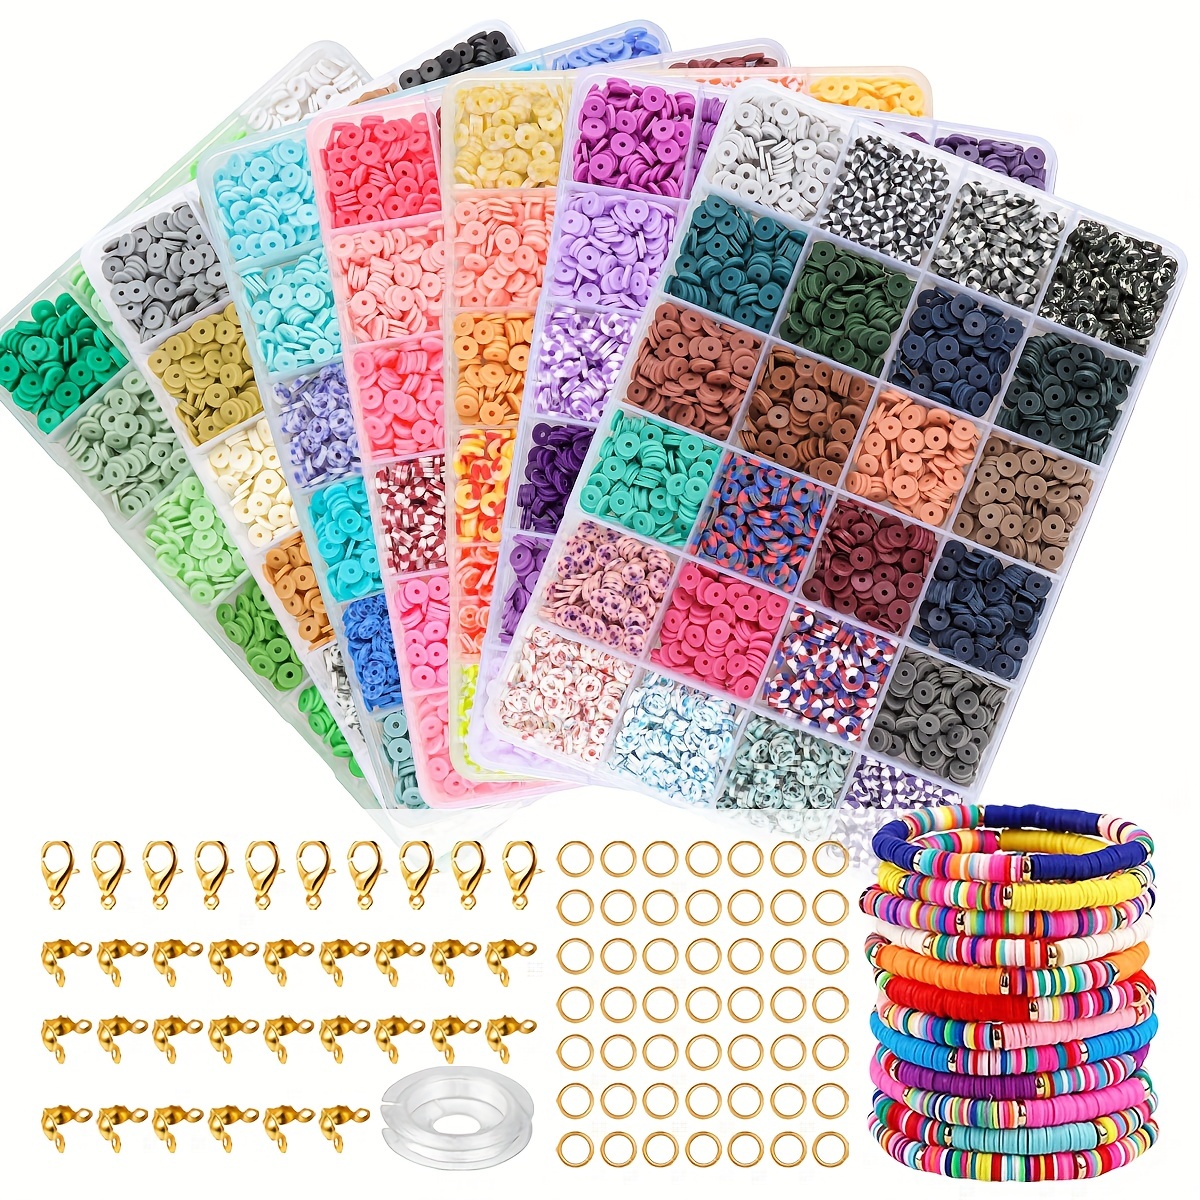 3300pcs Polymer Clay Beads For Jewelry Making, Valentine'S Day,Necklace Bracelet  Making Kit For Adults Crafts Gifts